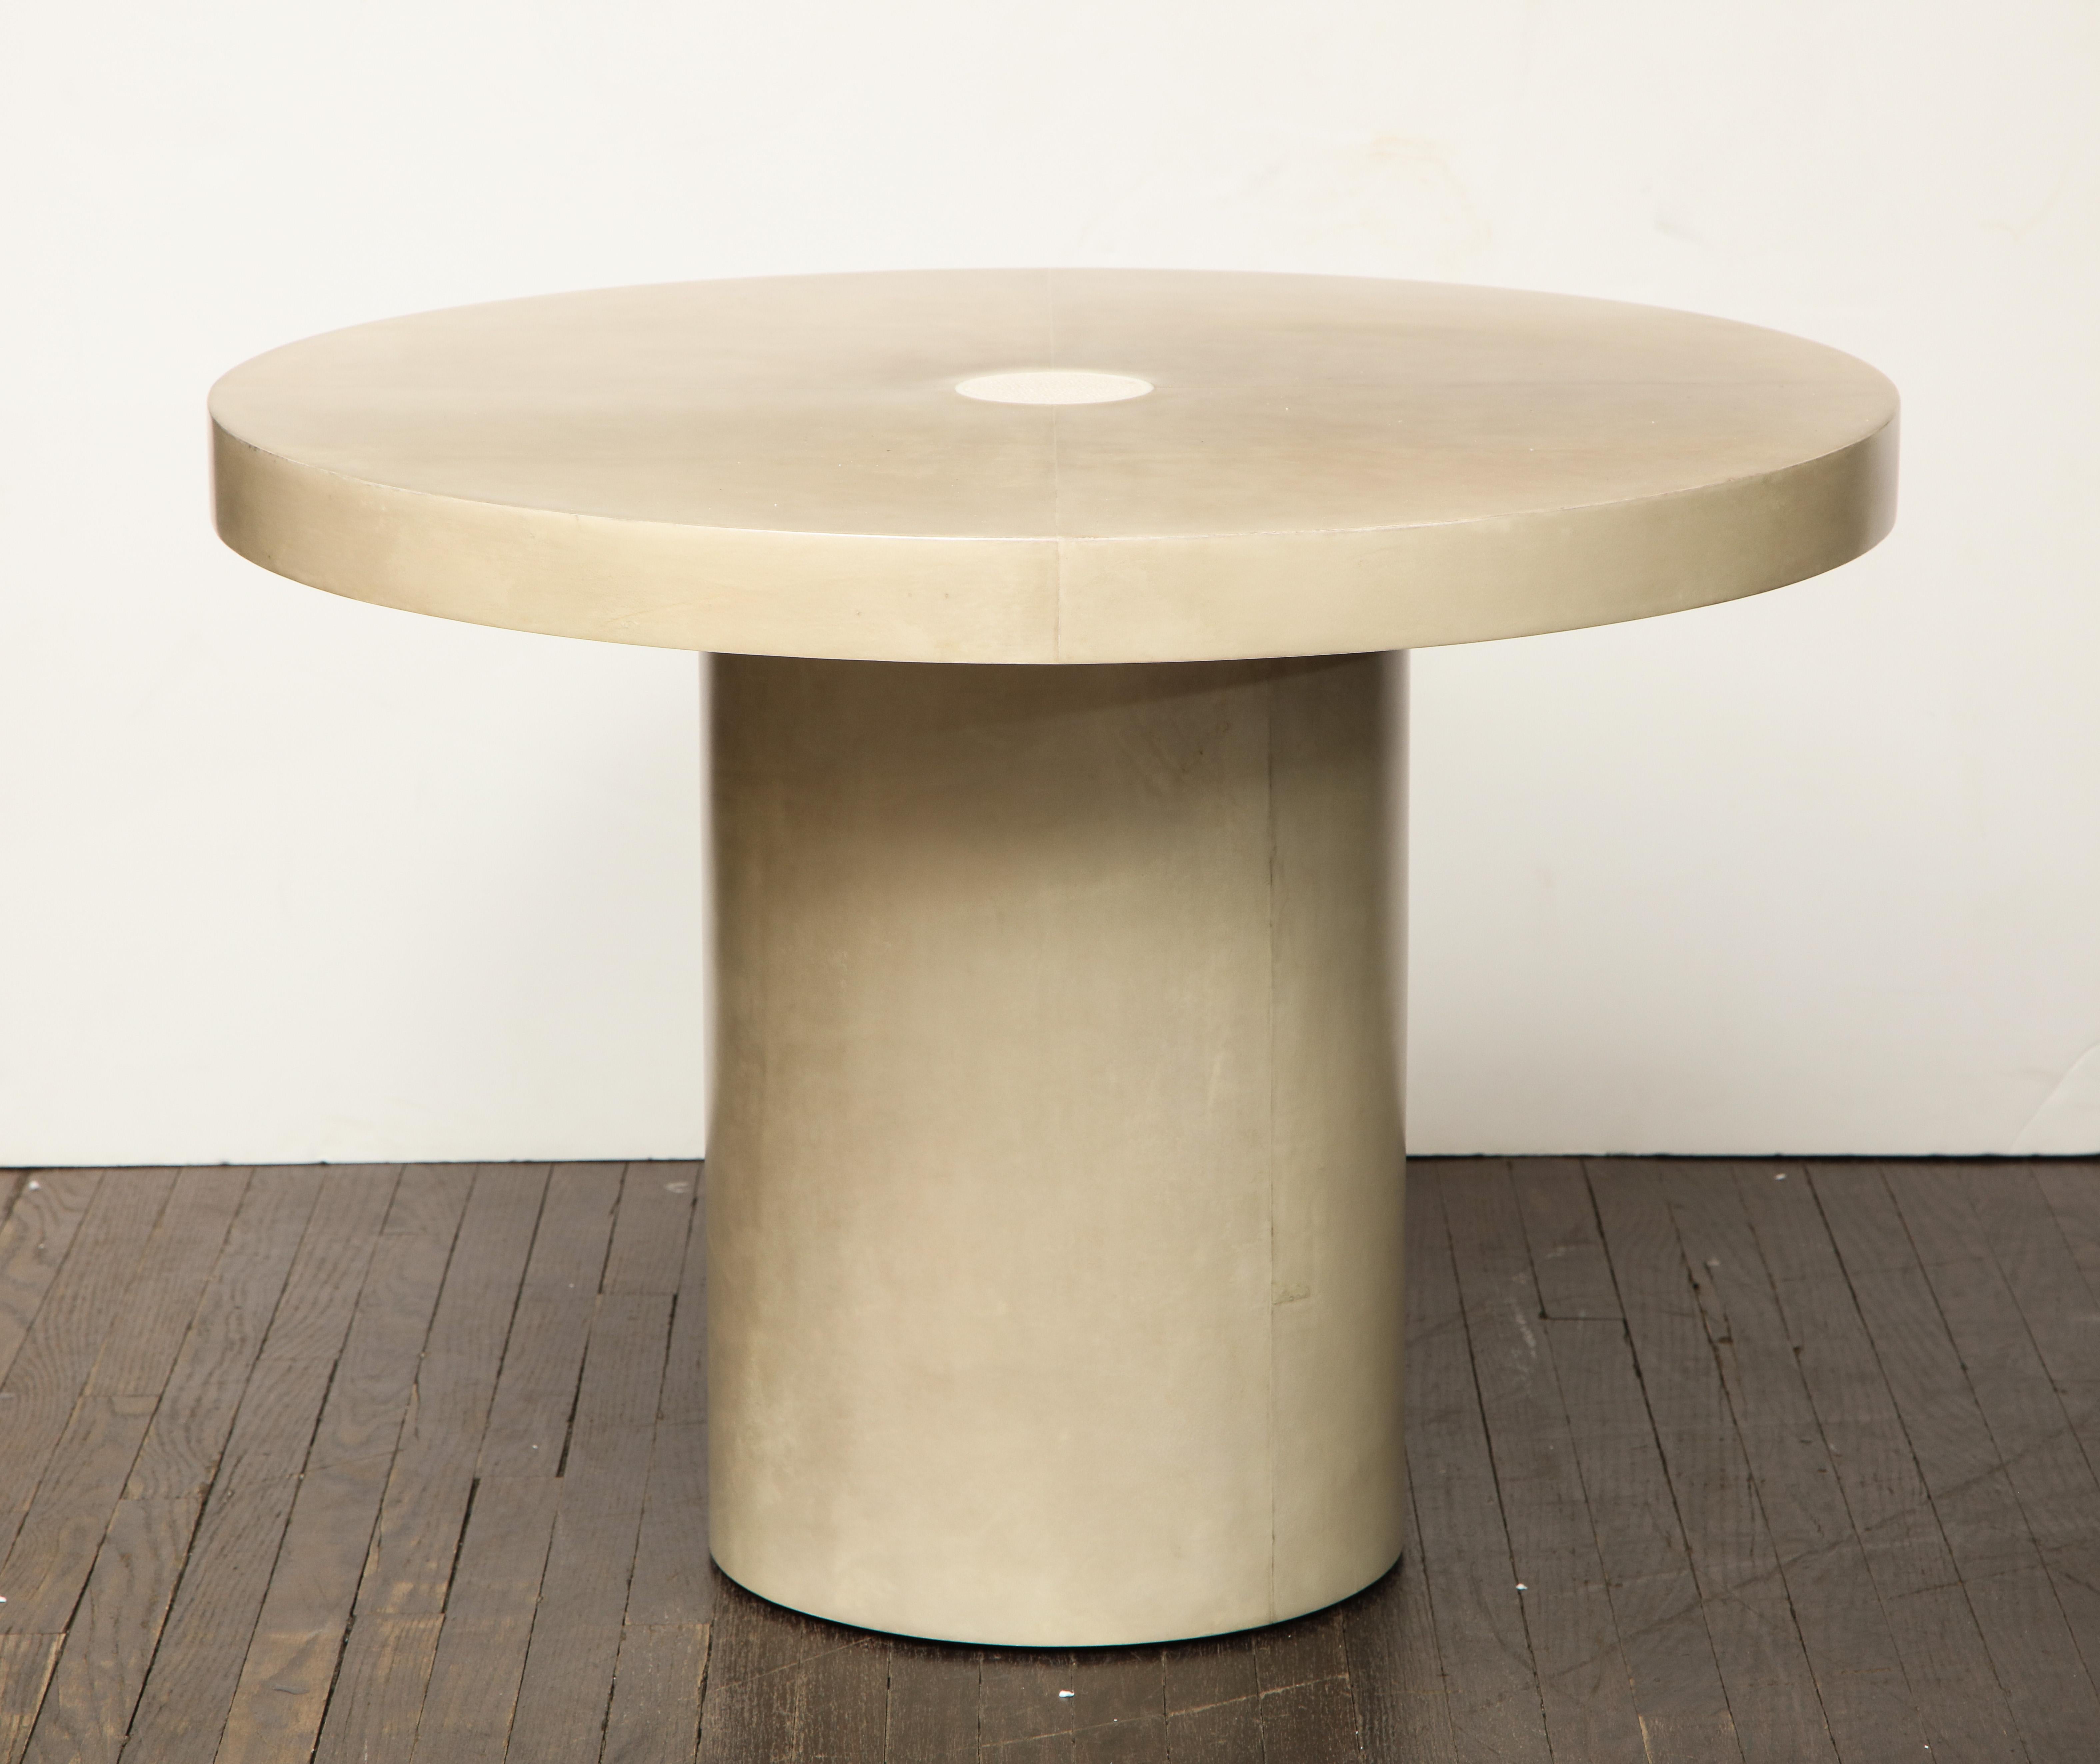 Custom round parchment table with genuine shagreen and bone trim. Customization is available in different sizes and colors.